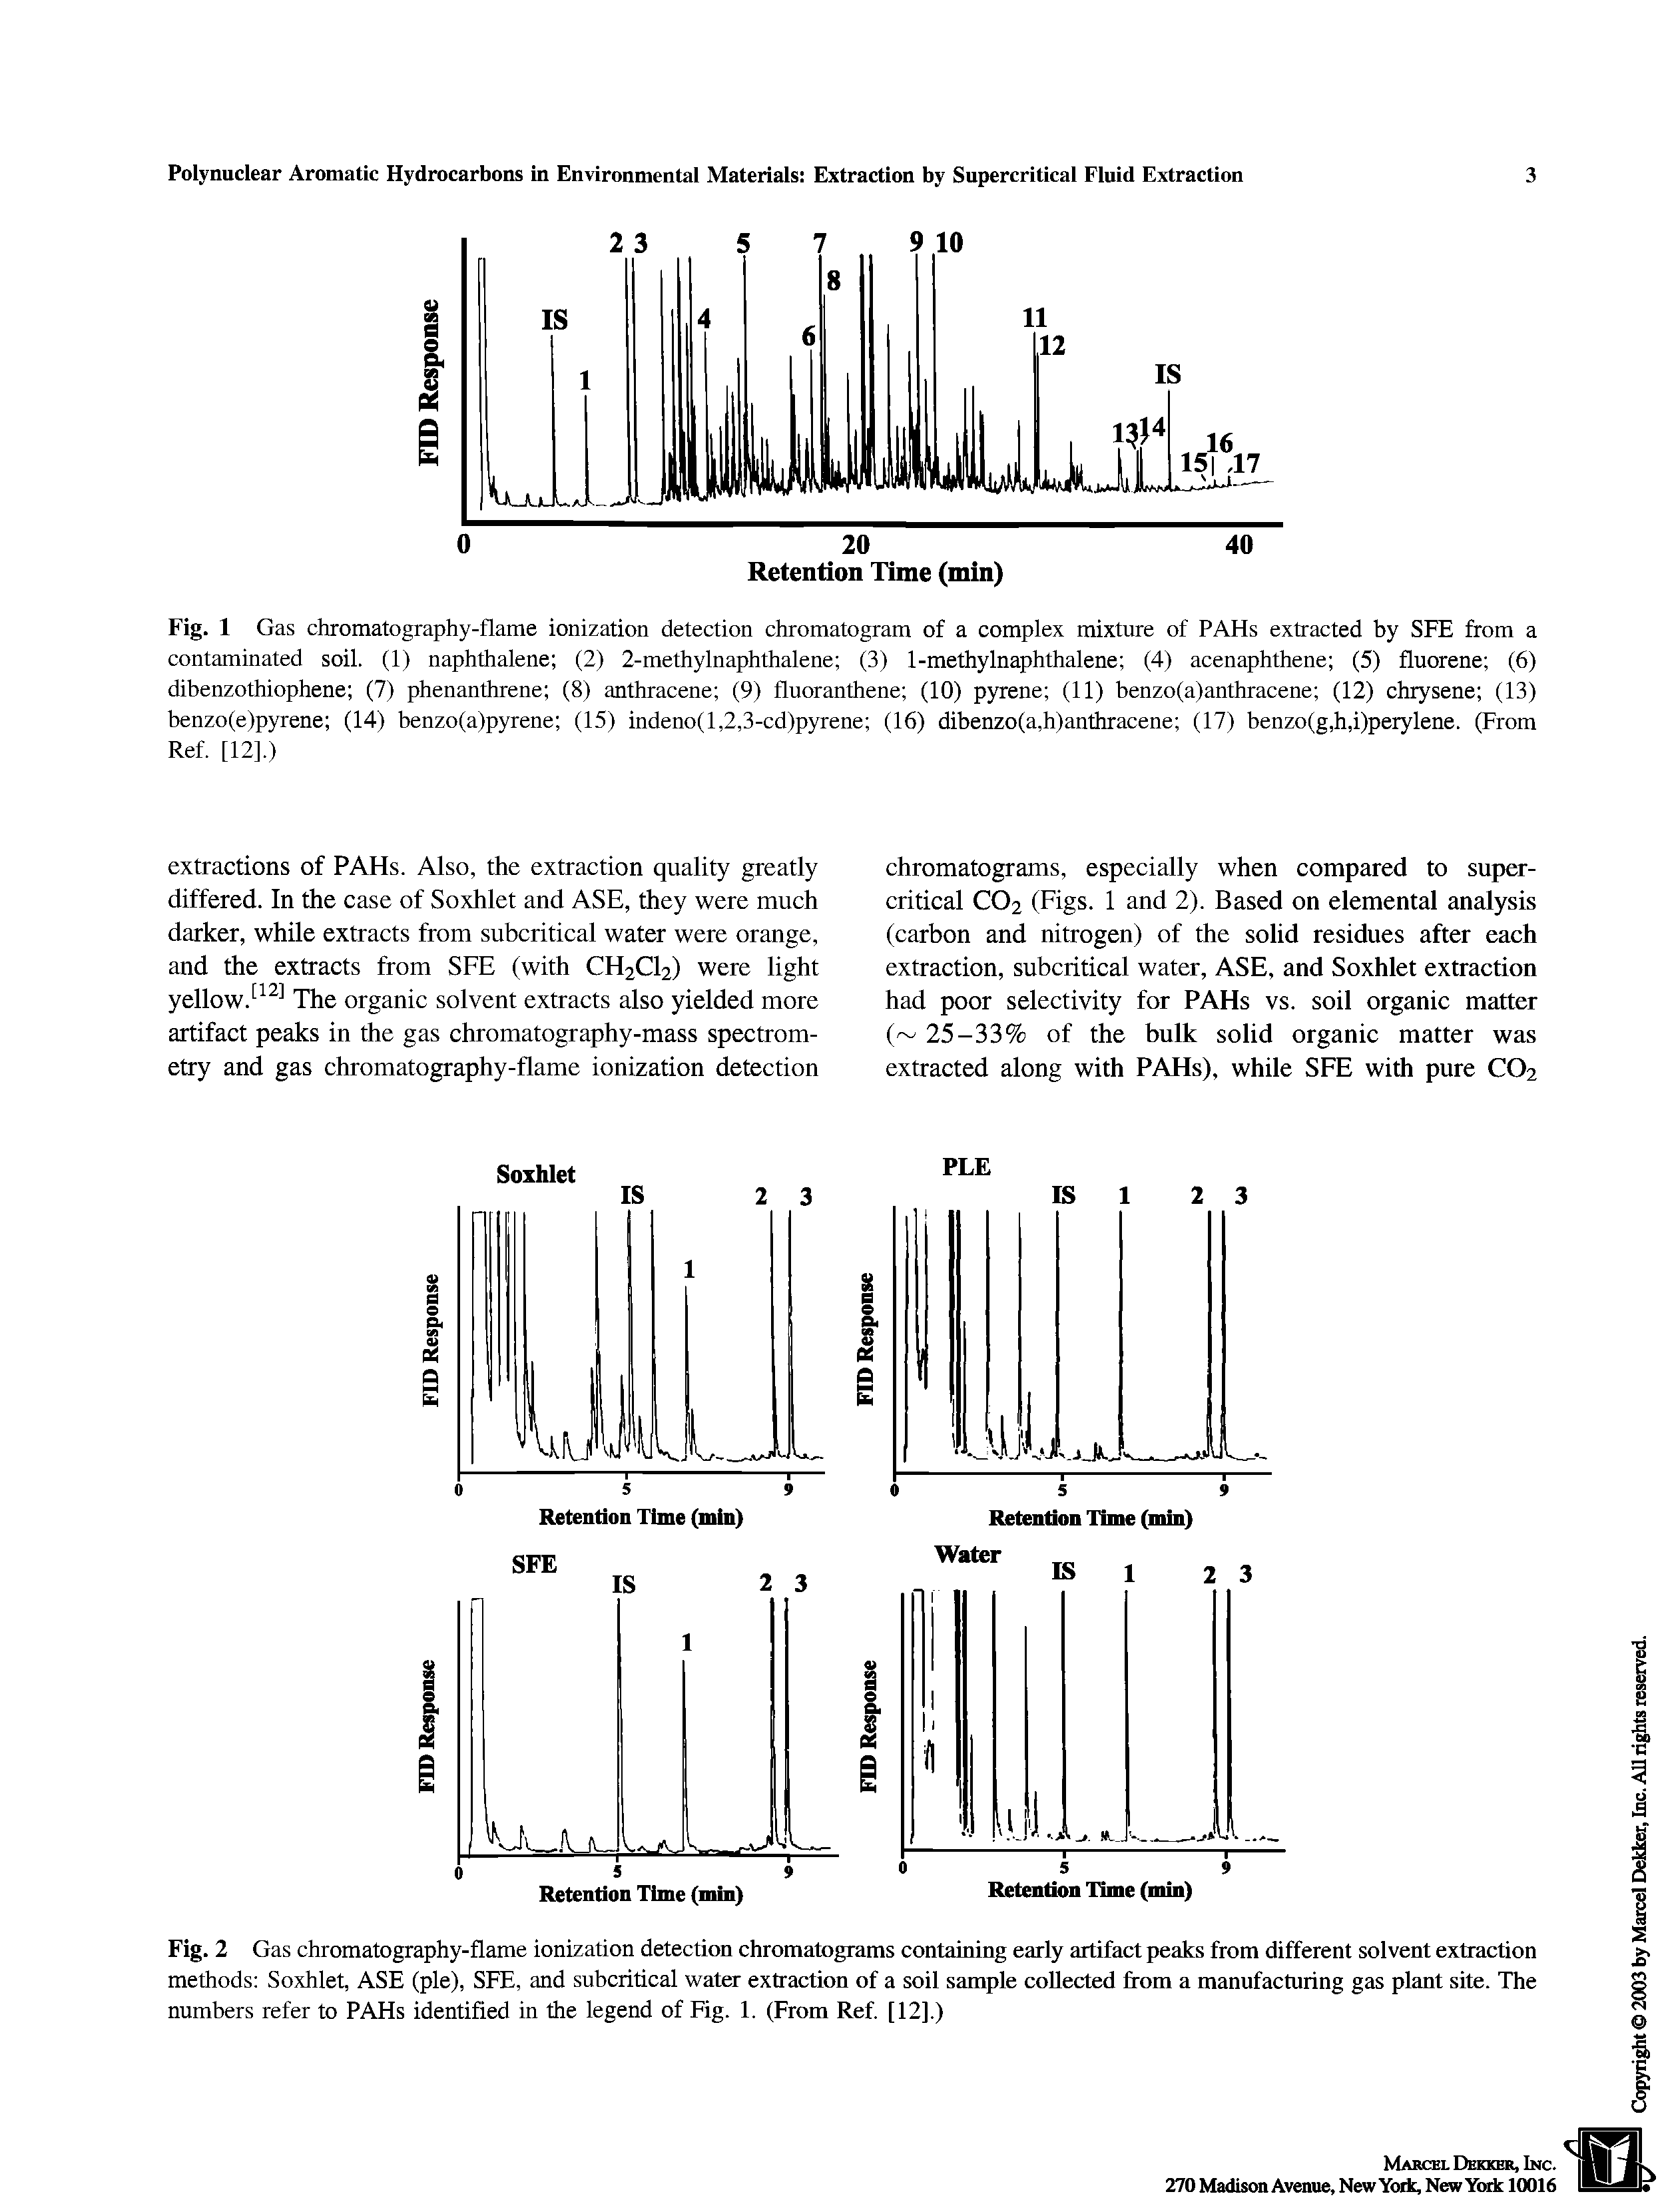 Fig. 1 Gas chromatography-flame ionization detection chromatogram of a complex mixture of PAHs extracted by SFE from a contaminated soil. (1) naphthalene (2) 2-methylnaphthalene (3) 1-methylnaphthalene (4) acenaphthene (5) fluorene (6) dibenzothiophene (7) phenanthrene (8) anthracene (9) fluoranthene (10) pyrene (11) benzo(a)anthracene (12) chrysene (13) benzo(e)pyrene (14) benzo(a)pyrene (15) indeno(l,2,3-cd)pyrene (16) dibenzo(a,h)anthracene (17) benzo(g,h,i)perylene. (From Ref. [12].)...